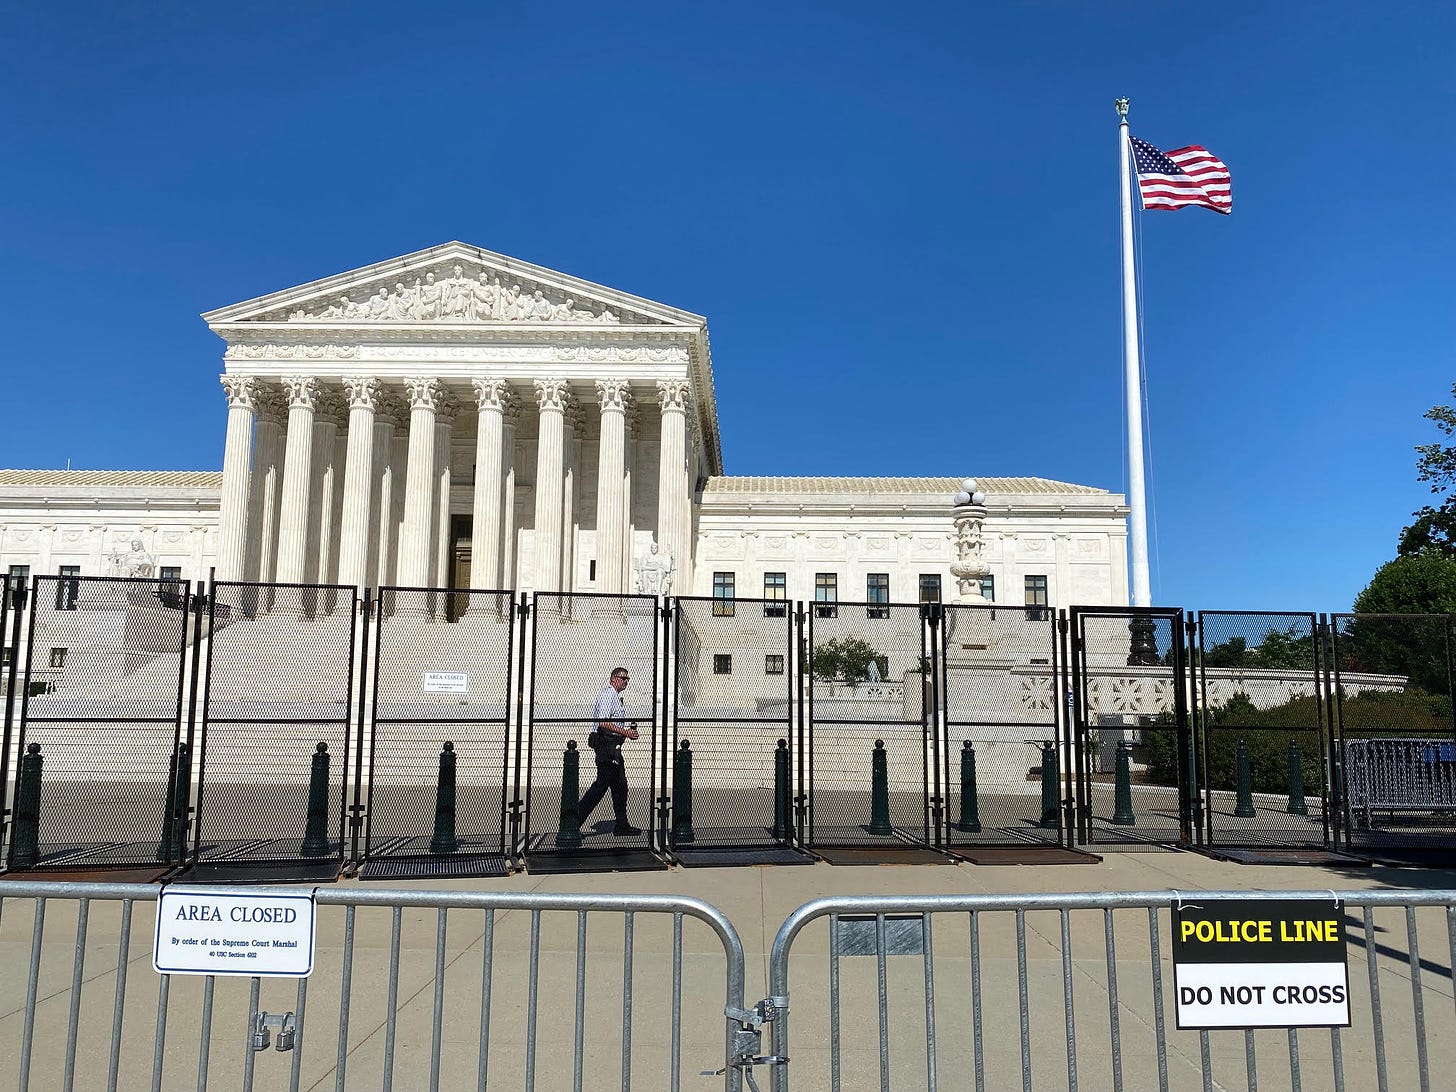 The Supreme Court building, behind two rows of fences.